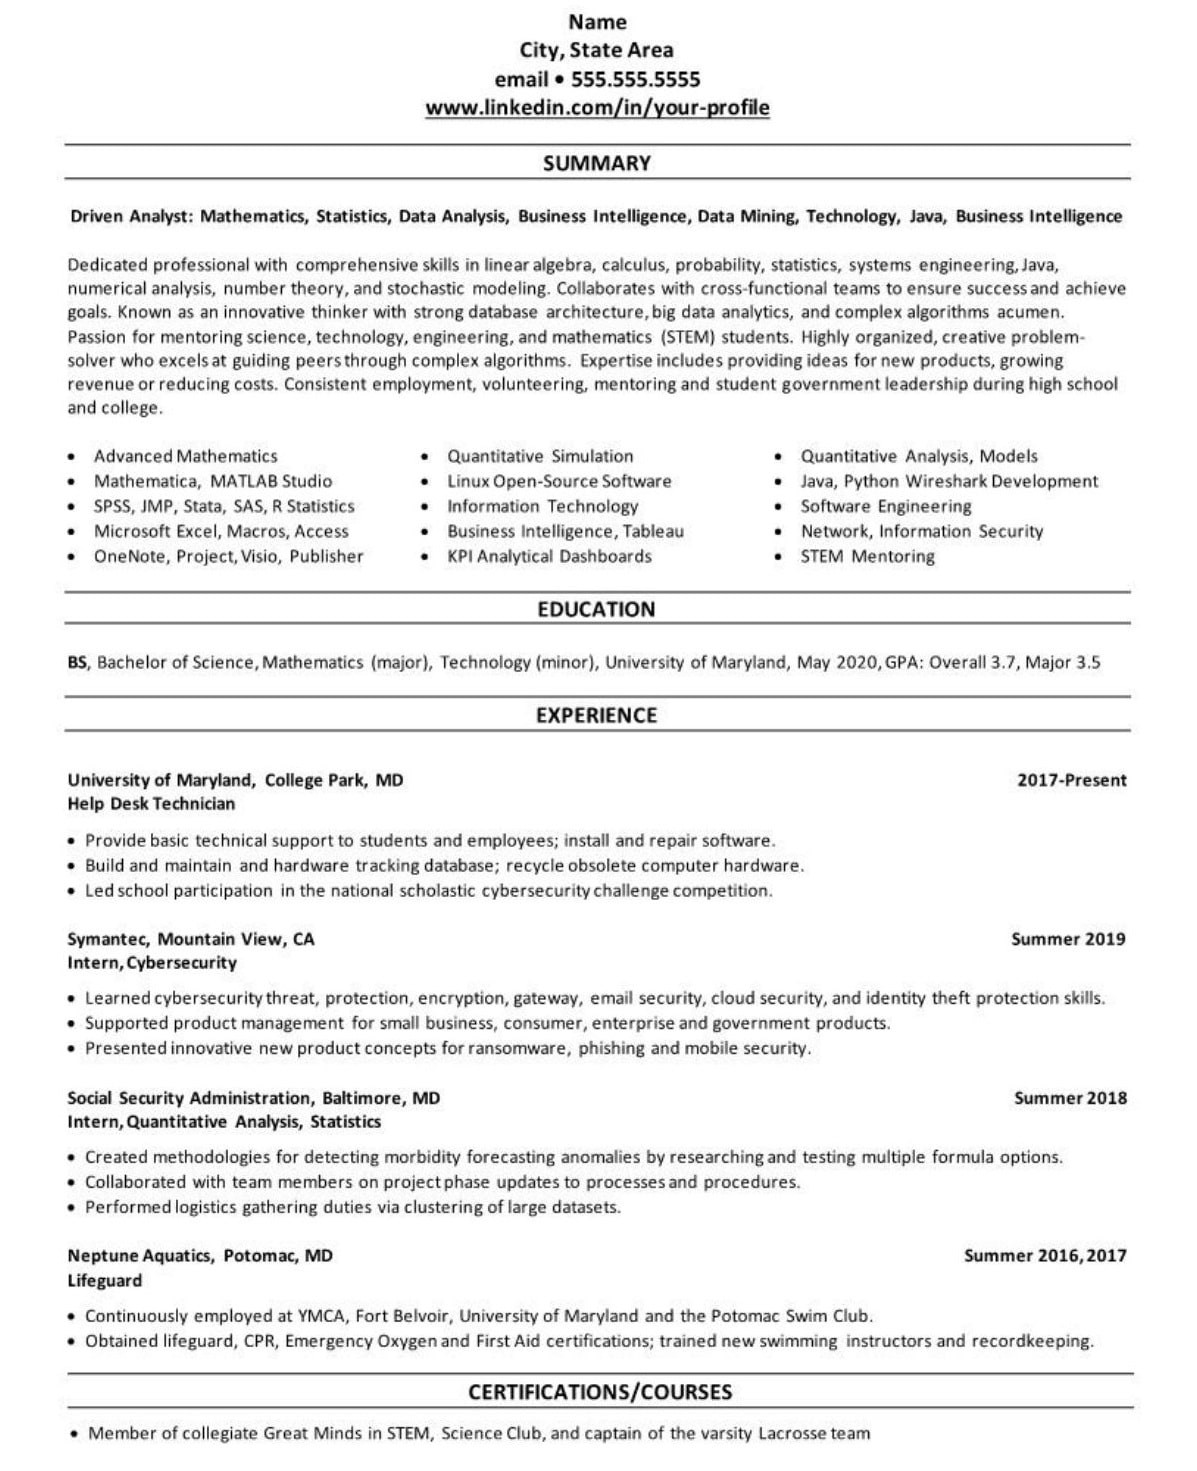 Sample Resume for Undergraduate College Students College Student/entry Level Resume & Linkedin Profile Examples